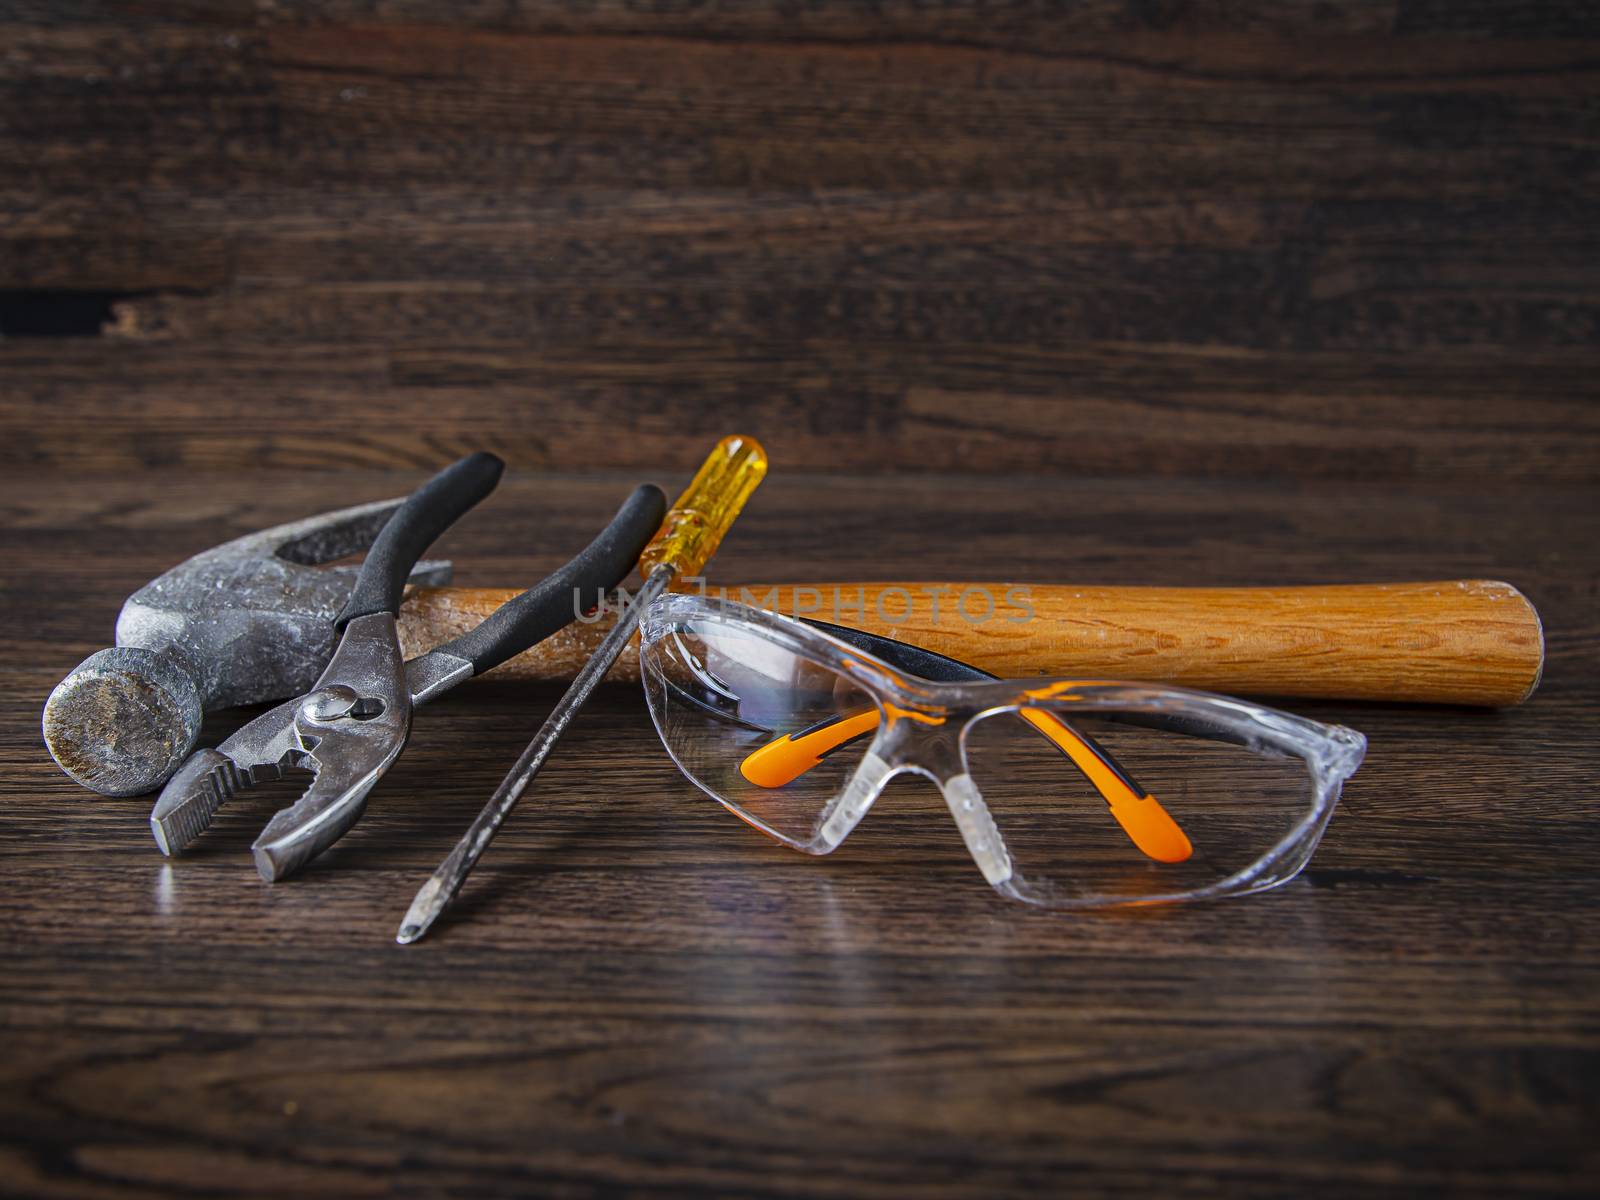 hammer, pliers, flat screw driver and protection glasses on a hard wood floor background